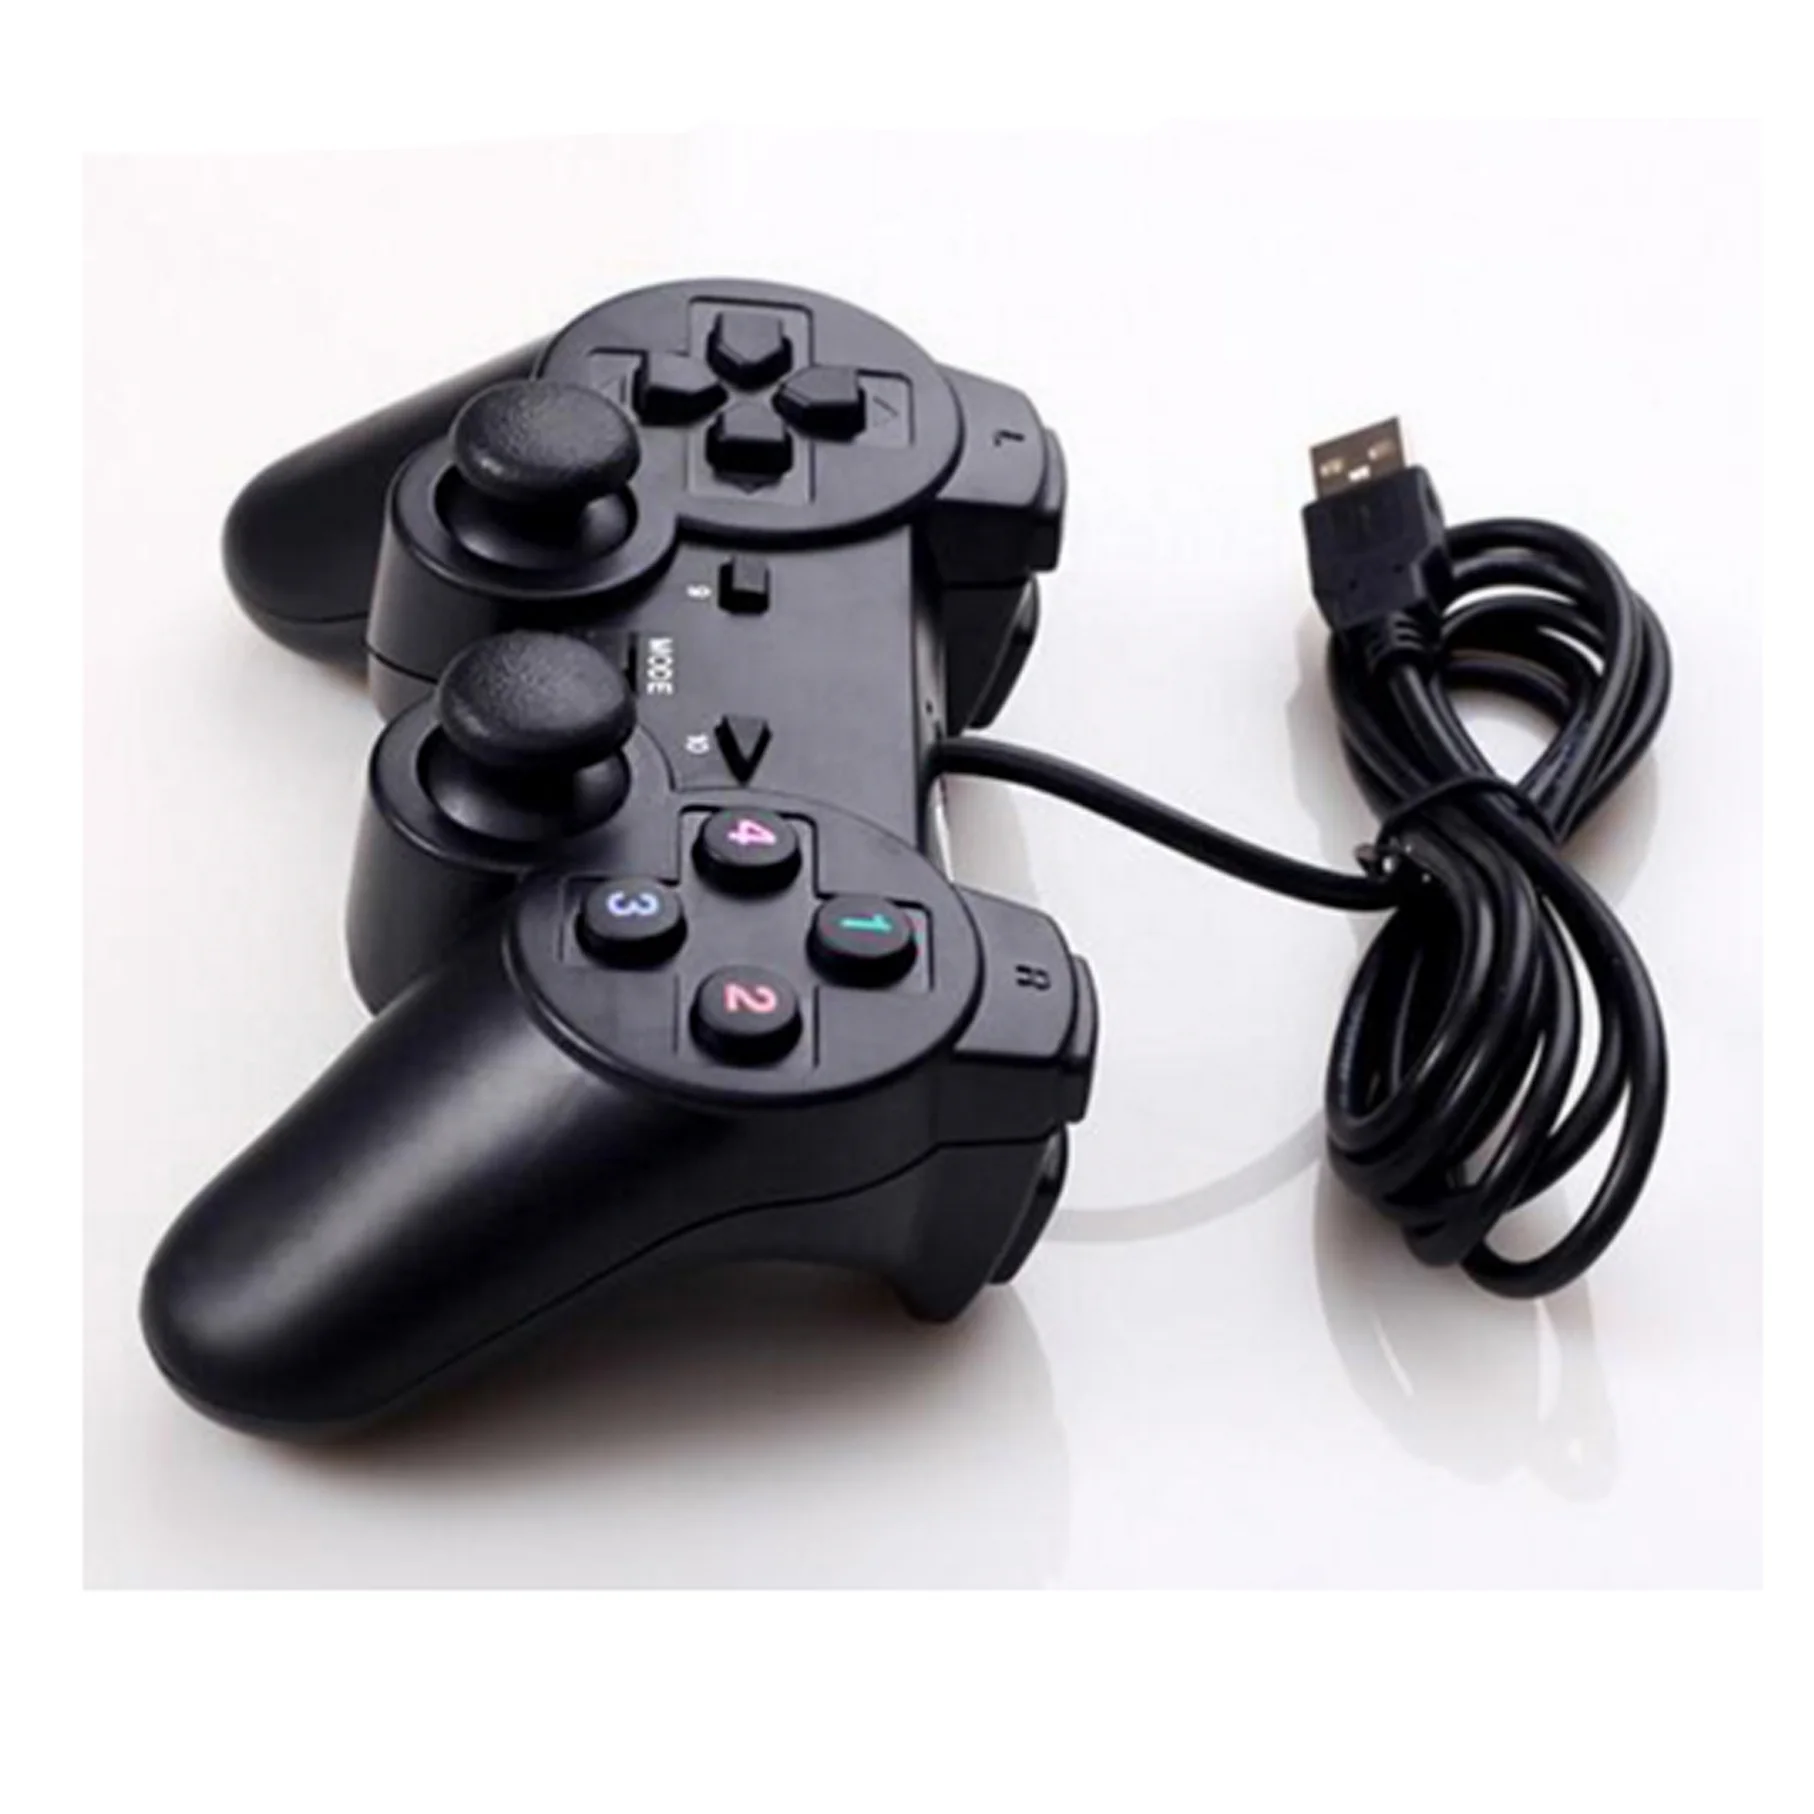 Augment Nest ticket Usb Controller Wired Gamepad For Sony Playstation2 Ps2 Pad Replacement -  Buy For Ps2 Controller,Gamepad For Sony Playstation 2,For Sony Playstation 2  Pad Product on Alibaba.com